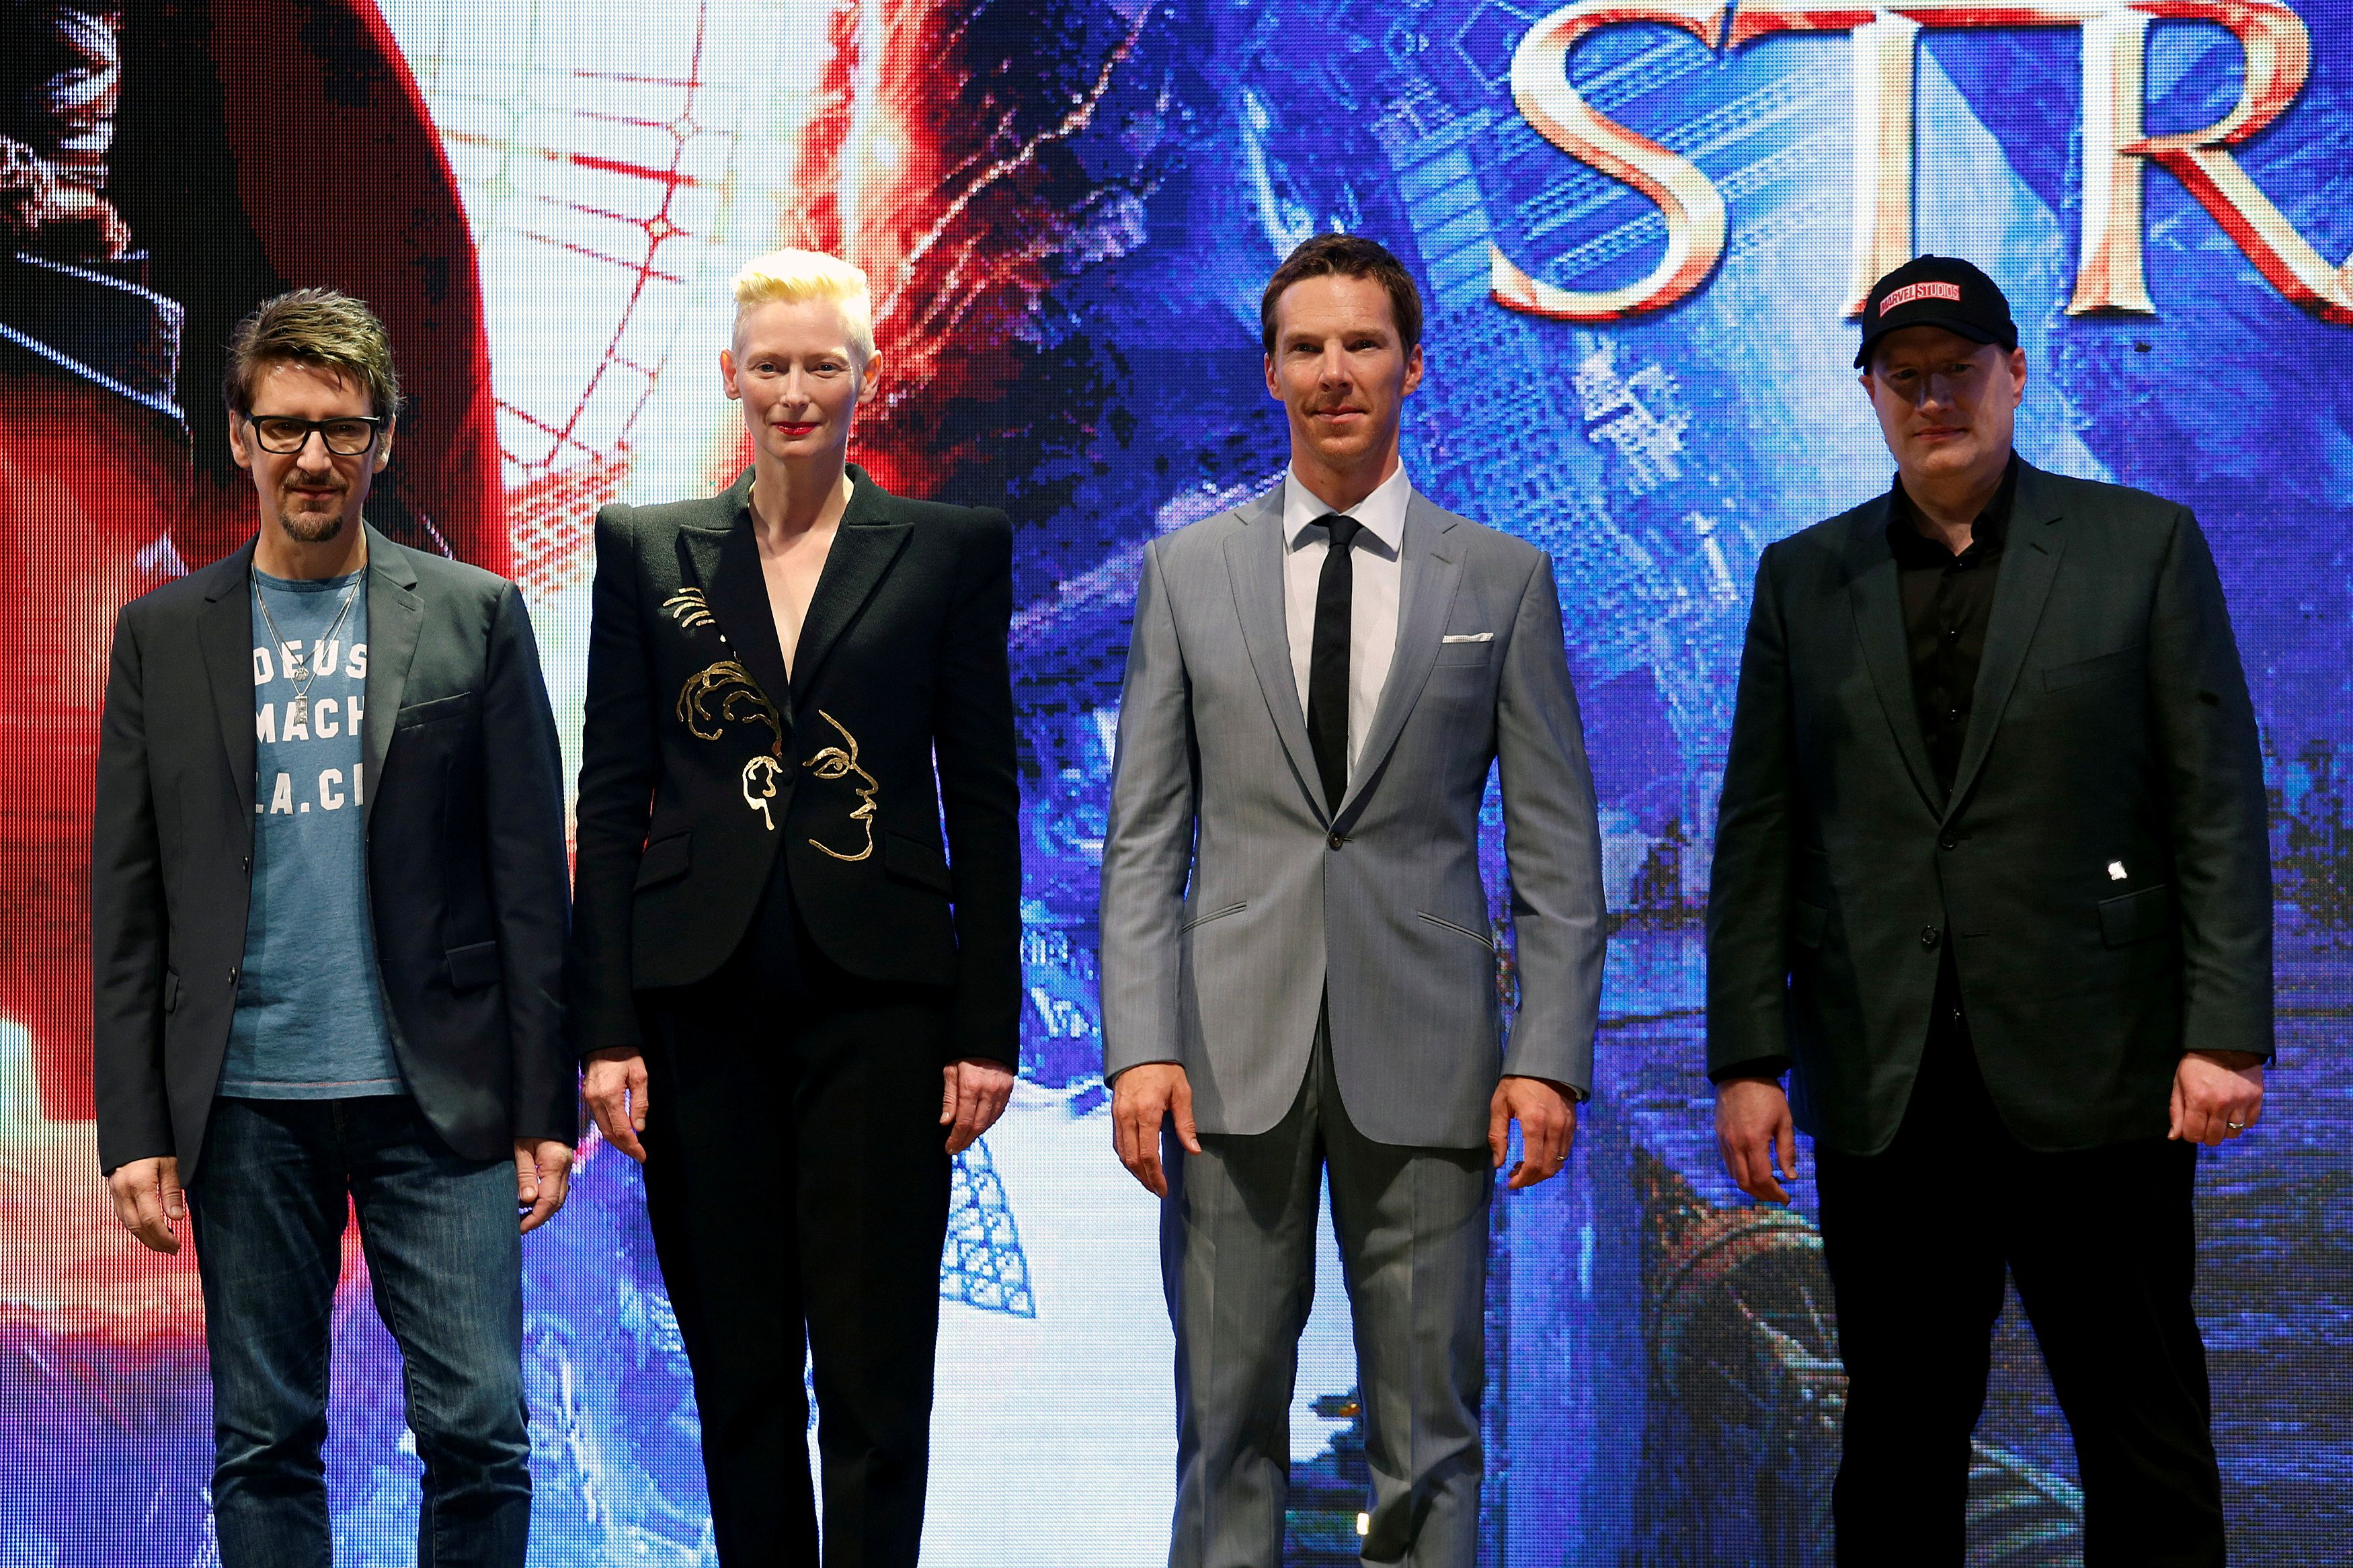 Director Derrickson, actors Swinton, Cumberbatch and Marvel Studio President Feige attend a promotion of film 